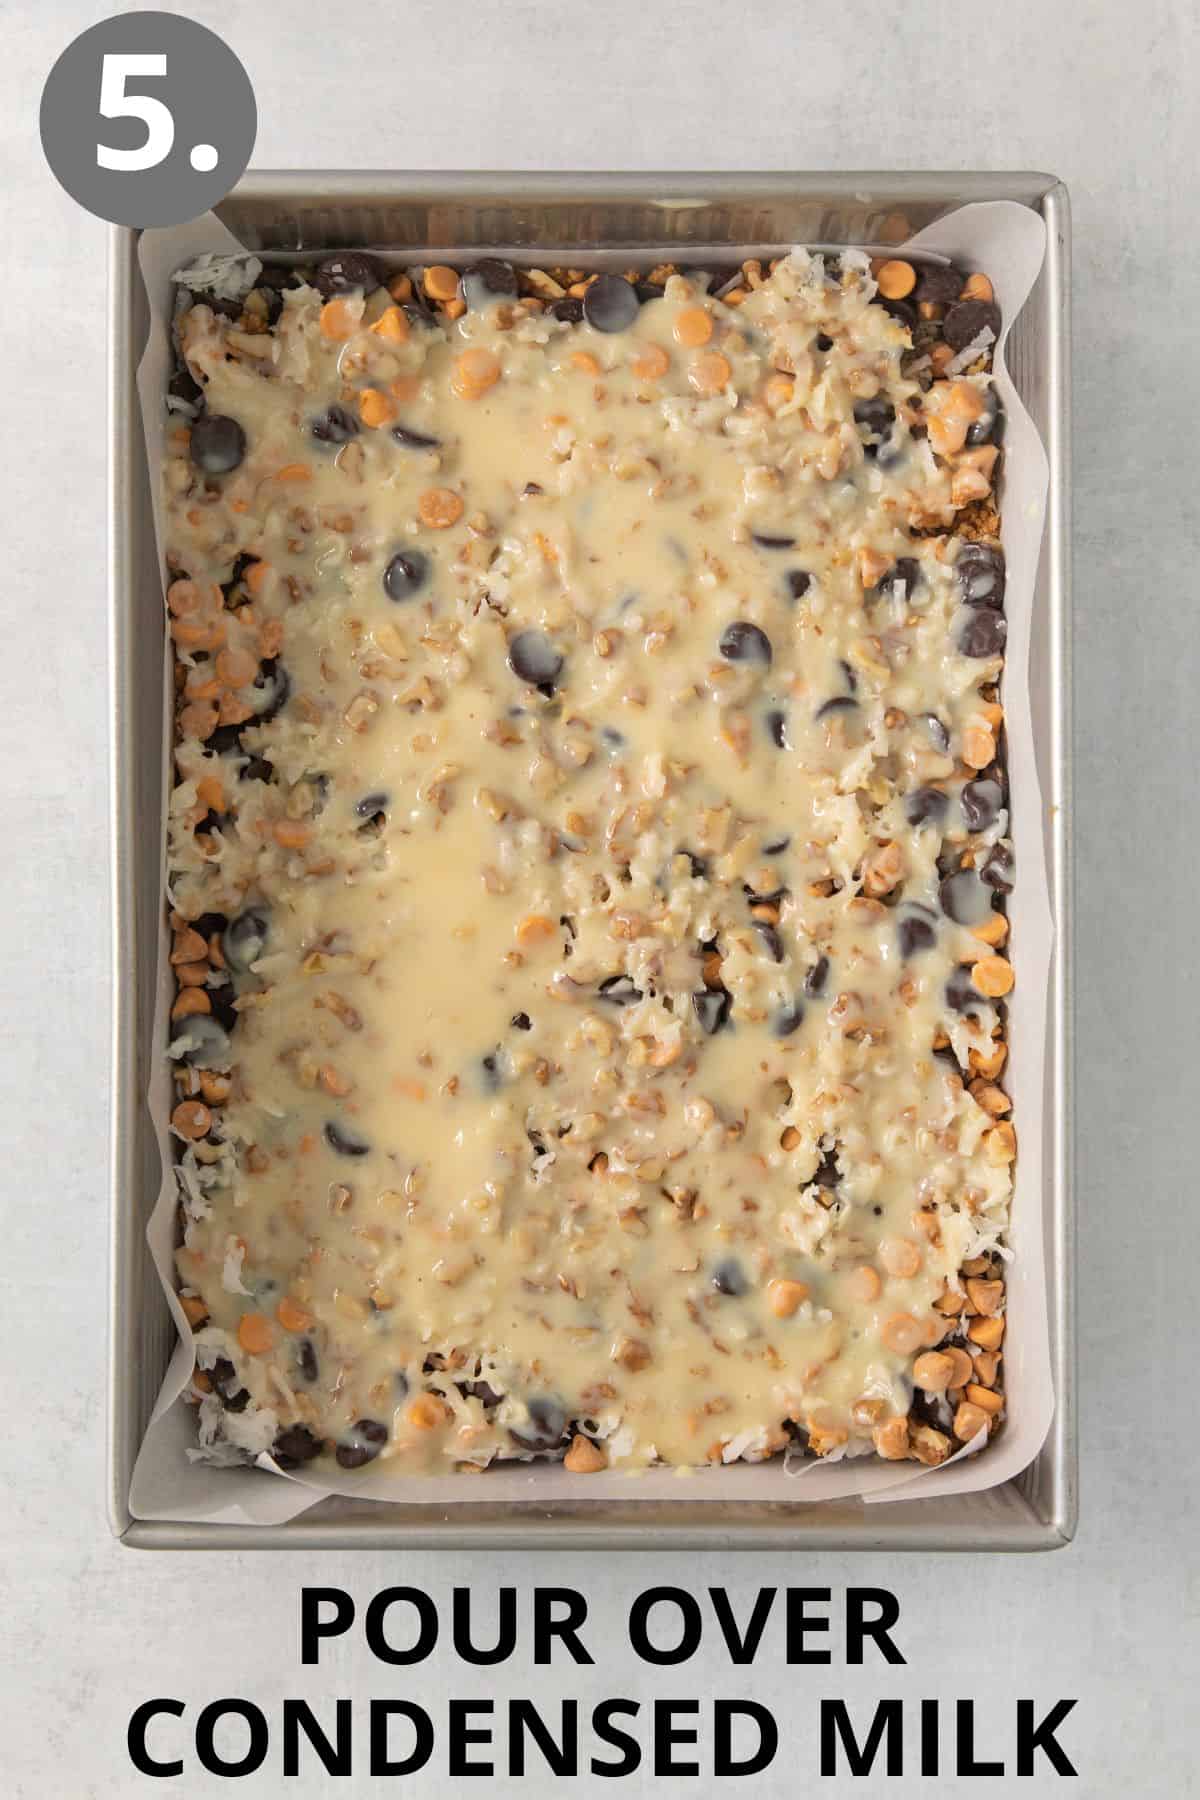 Condensed milk poured over the 7-layer bars